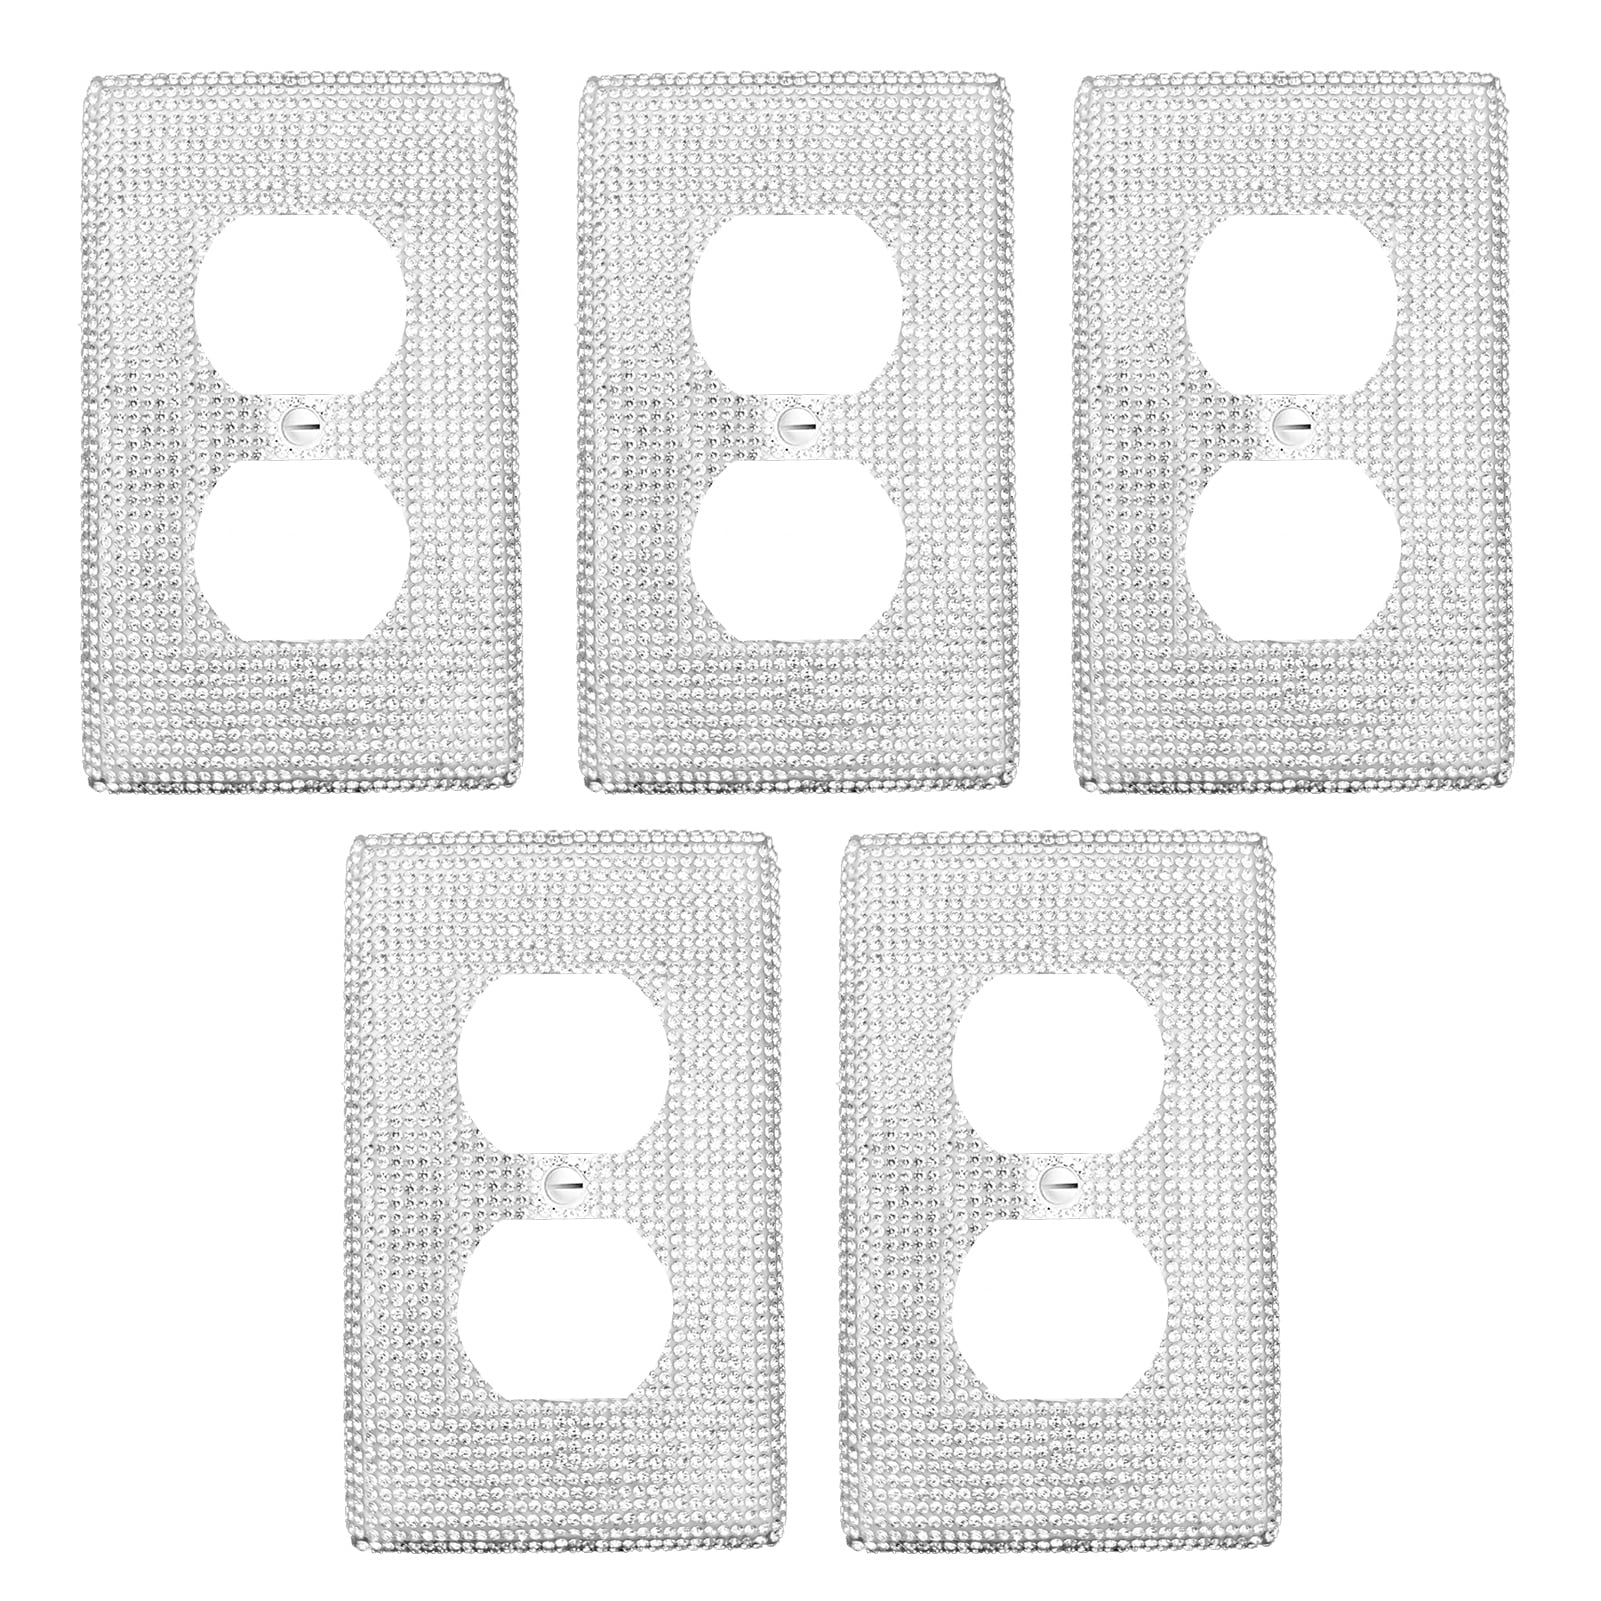 1-Gang Device Receptacle Wallplate Single Outlet Wall Plate/Panel Plate/Cover Light Panel Cover Illustration Font Art Plicing